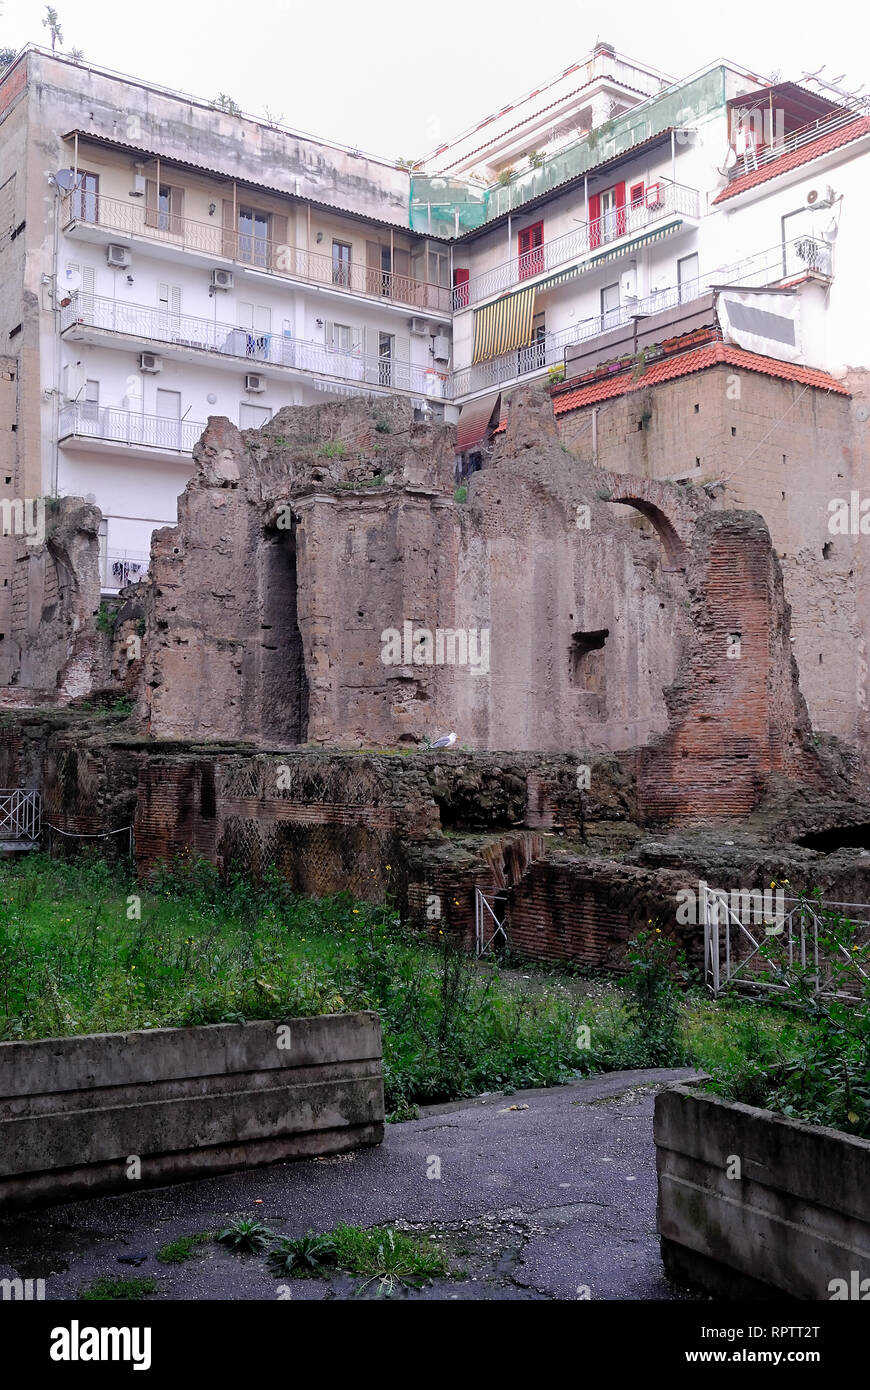 Near the Duomo of Naples there is the archaeological complex of Vico Carminiello ai Mannesi. It brought to light by the bombings of 1943, which destroyed the Church of Santa Maria del Carmine at Mannesi and adjacent buildings, documents part of an insula (isolated) of the ancient city also occupied by a small thermal building. This is a multi-layered construction, quite articulated, dating from its main structures at the end of the first century AD, but which presents elements attributable to different phases, the oldest of which belong to the Republican age. Stock Photo